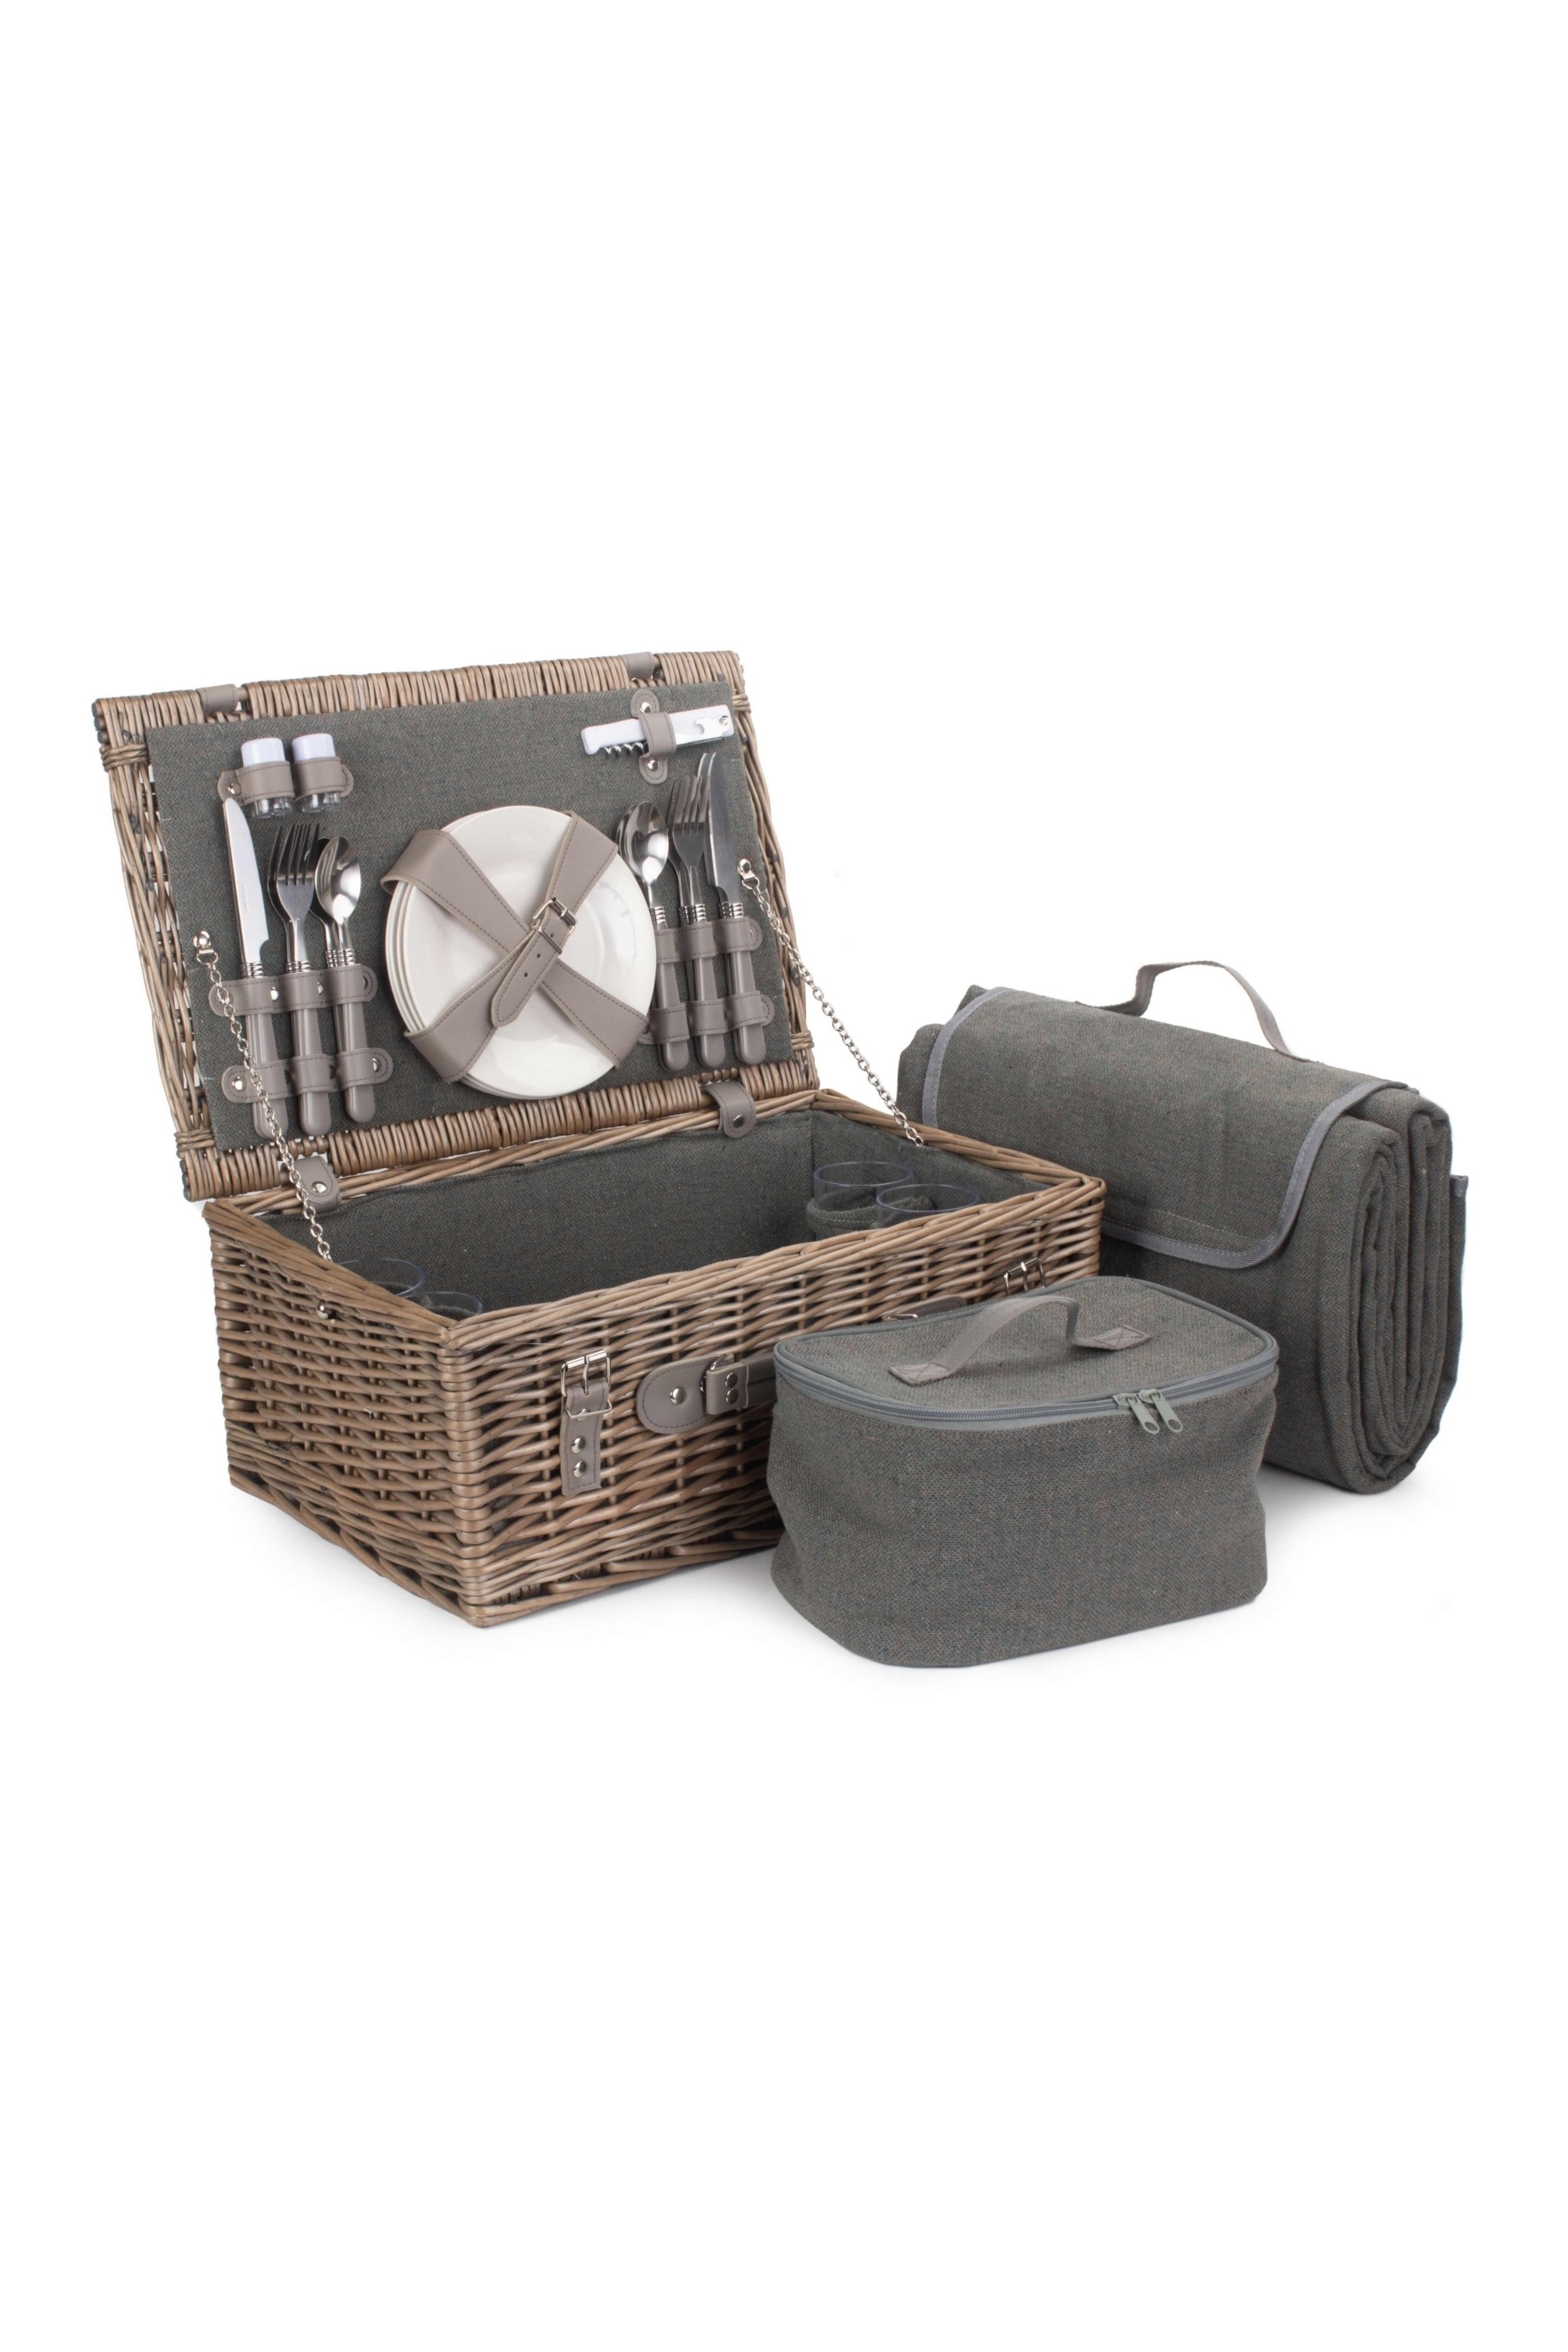 4 Person Grey Tweed Fitted Picnic Basket -